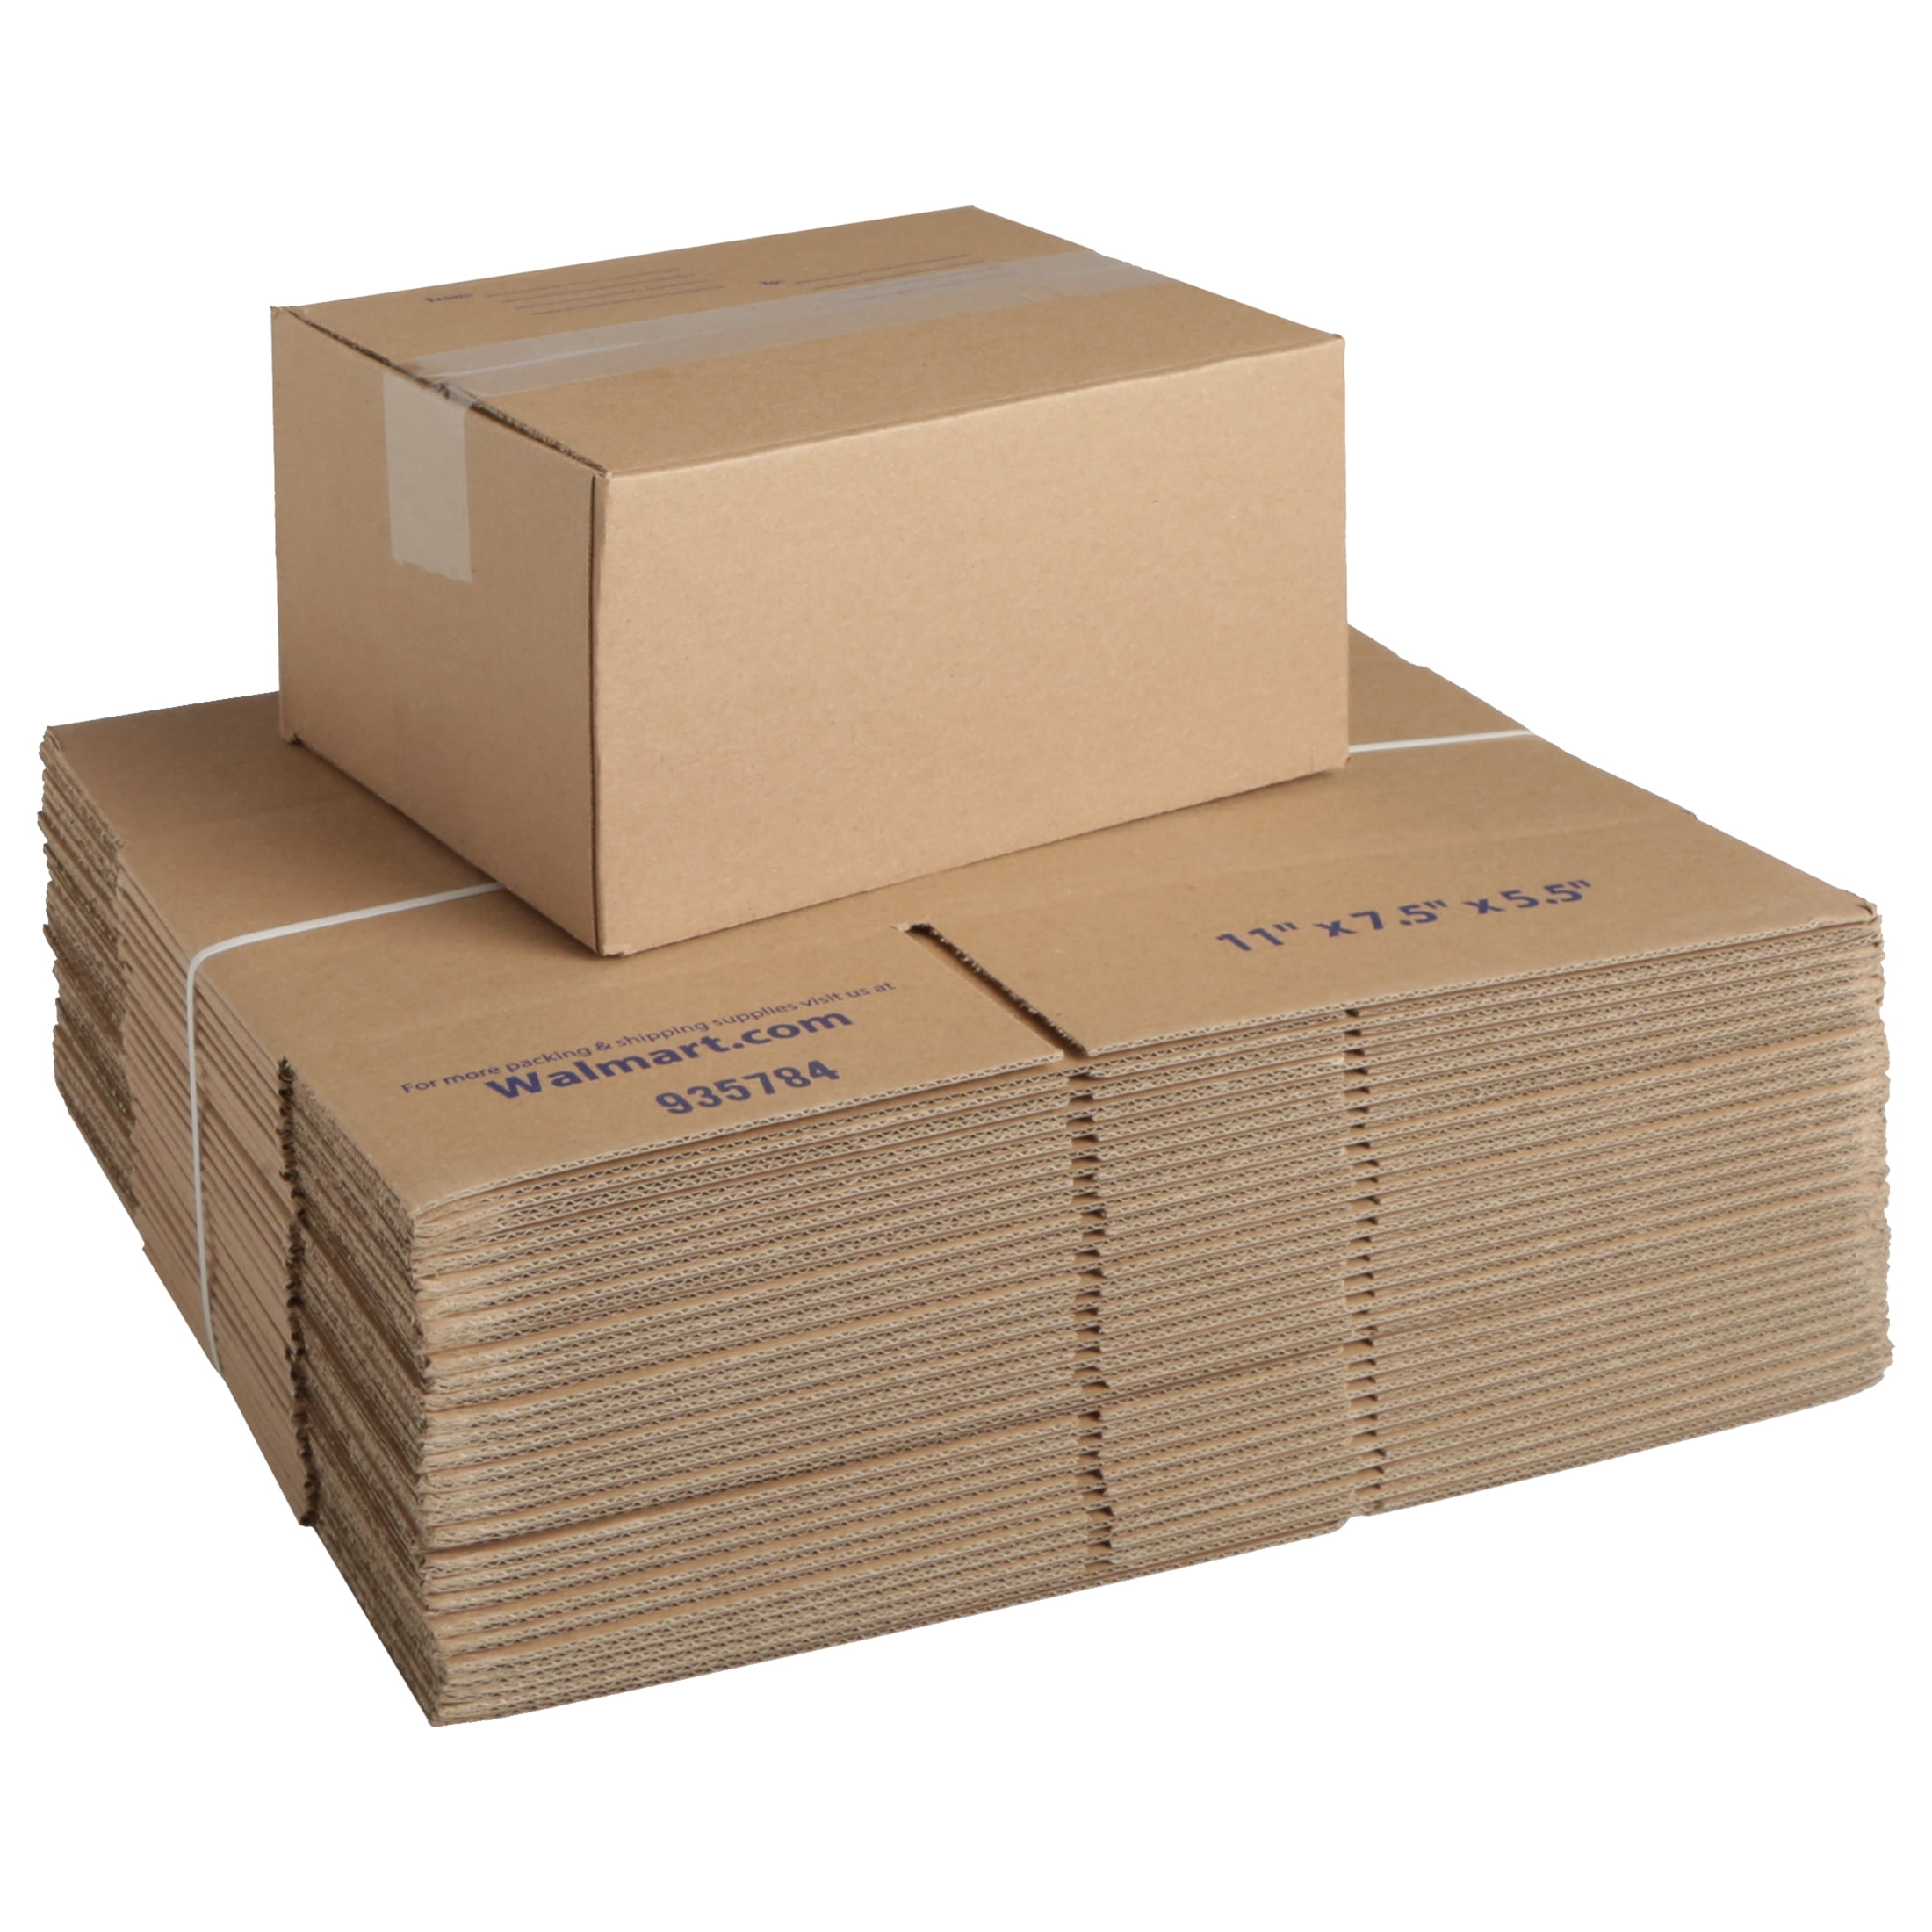 Ship Now Supply SN18166 Flat Corrugated Boxes 18L x 16W x 6H Pack of 25 Kraft 